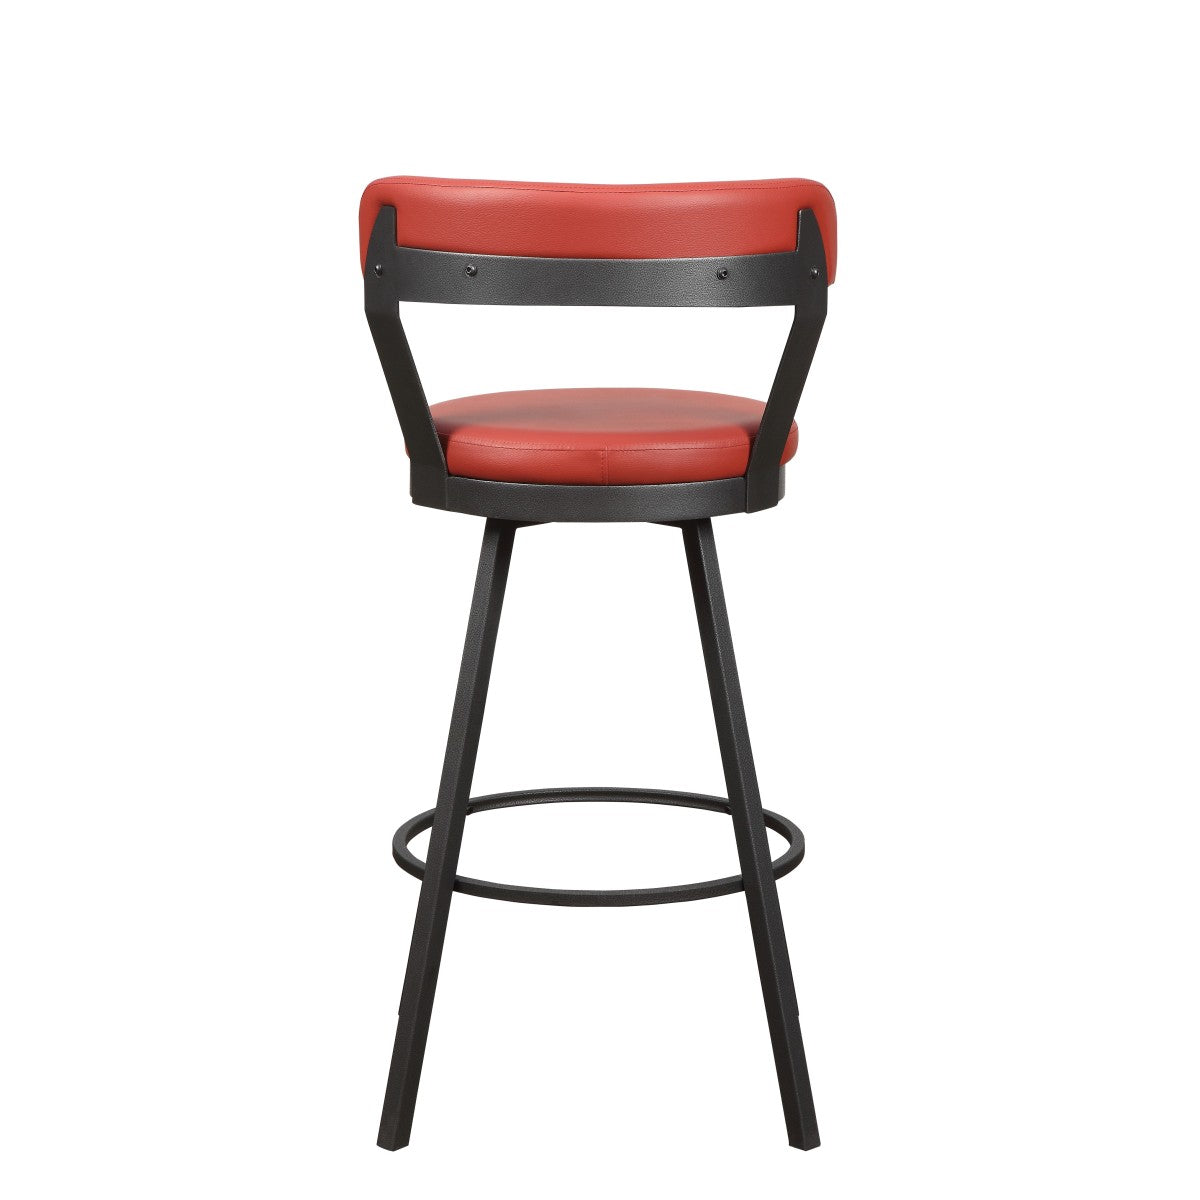 Swivel Pub Chair Red 5566-29RD (Set of 2)